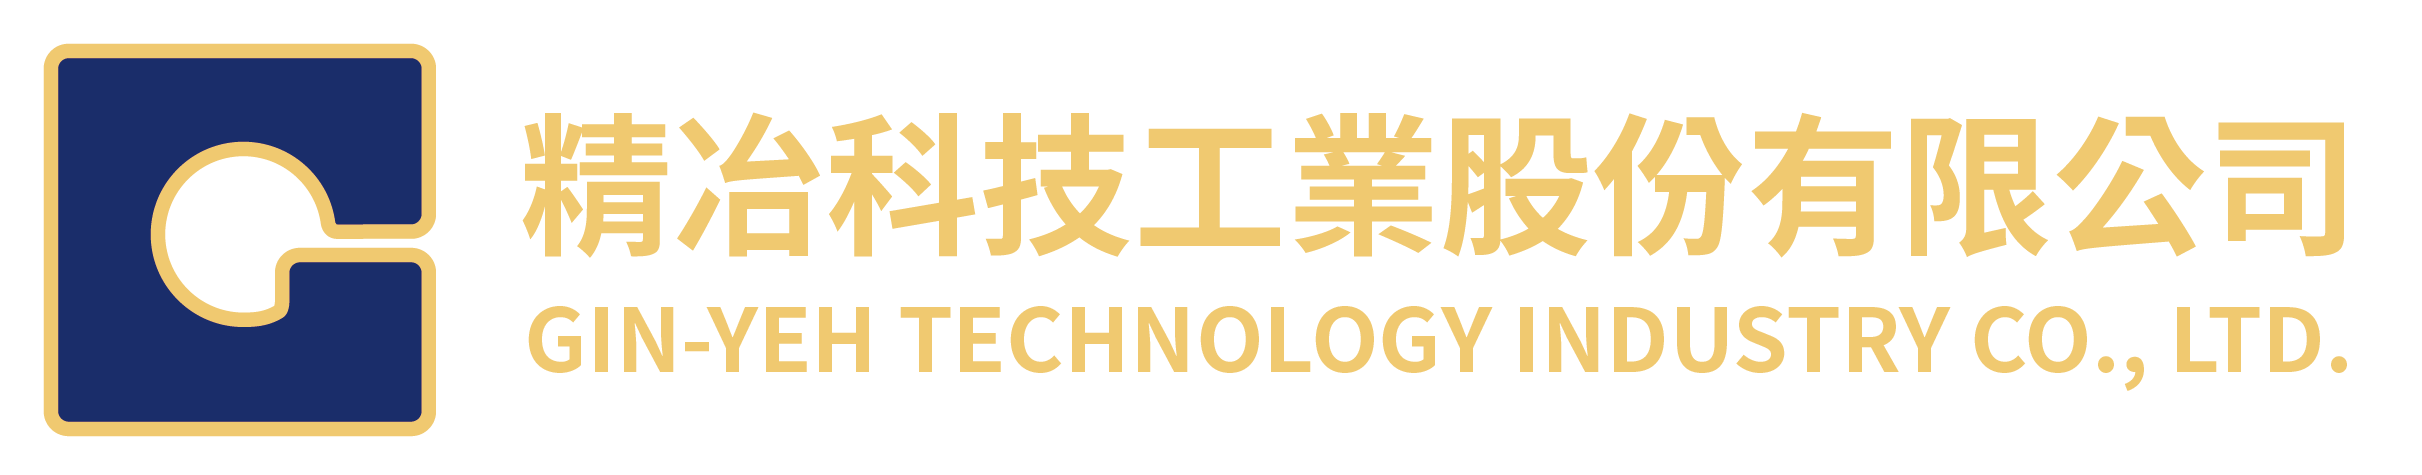 GIN-YEH TECHNOLOGY INDUSTRY CO., LTD.